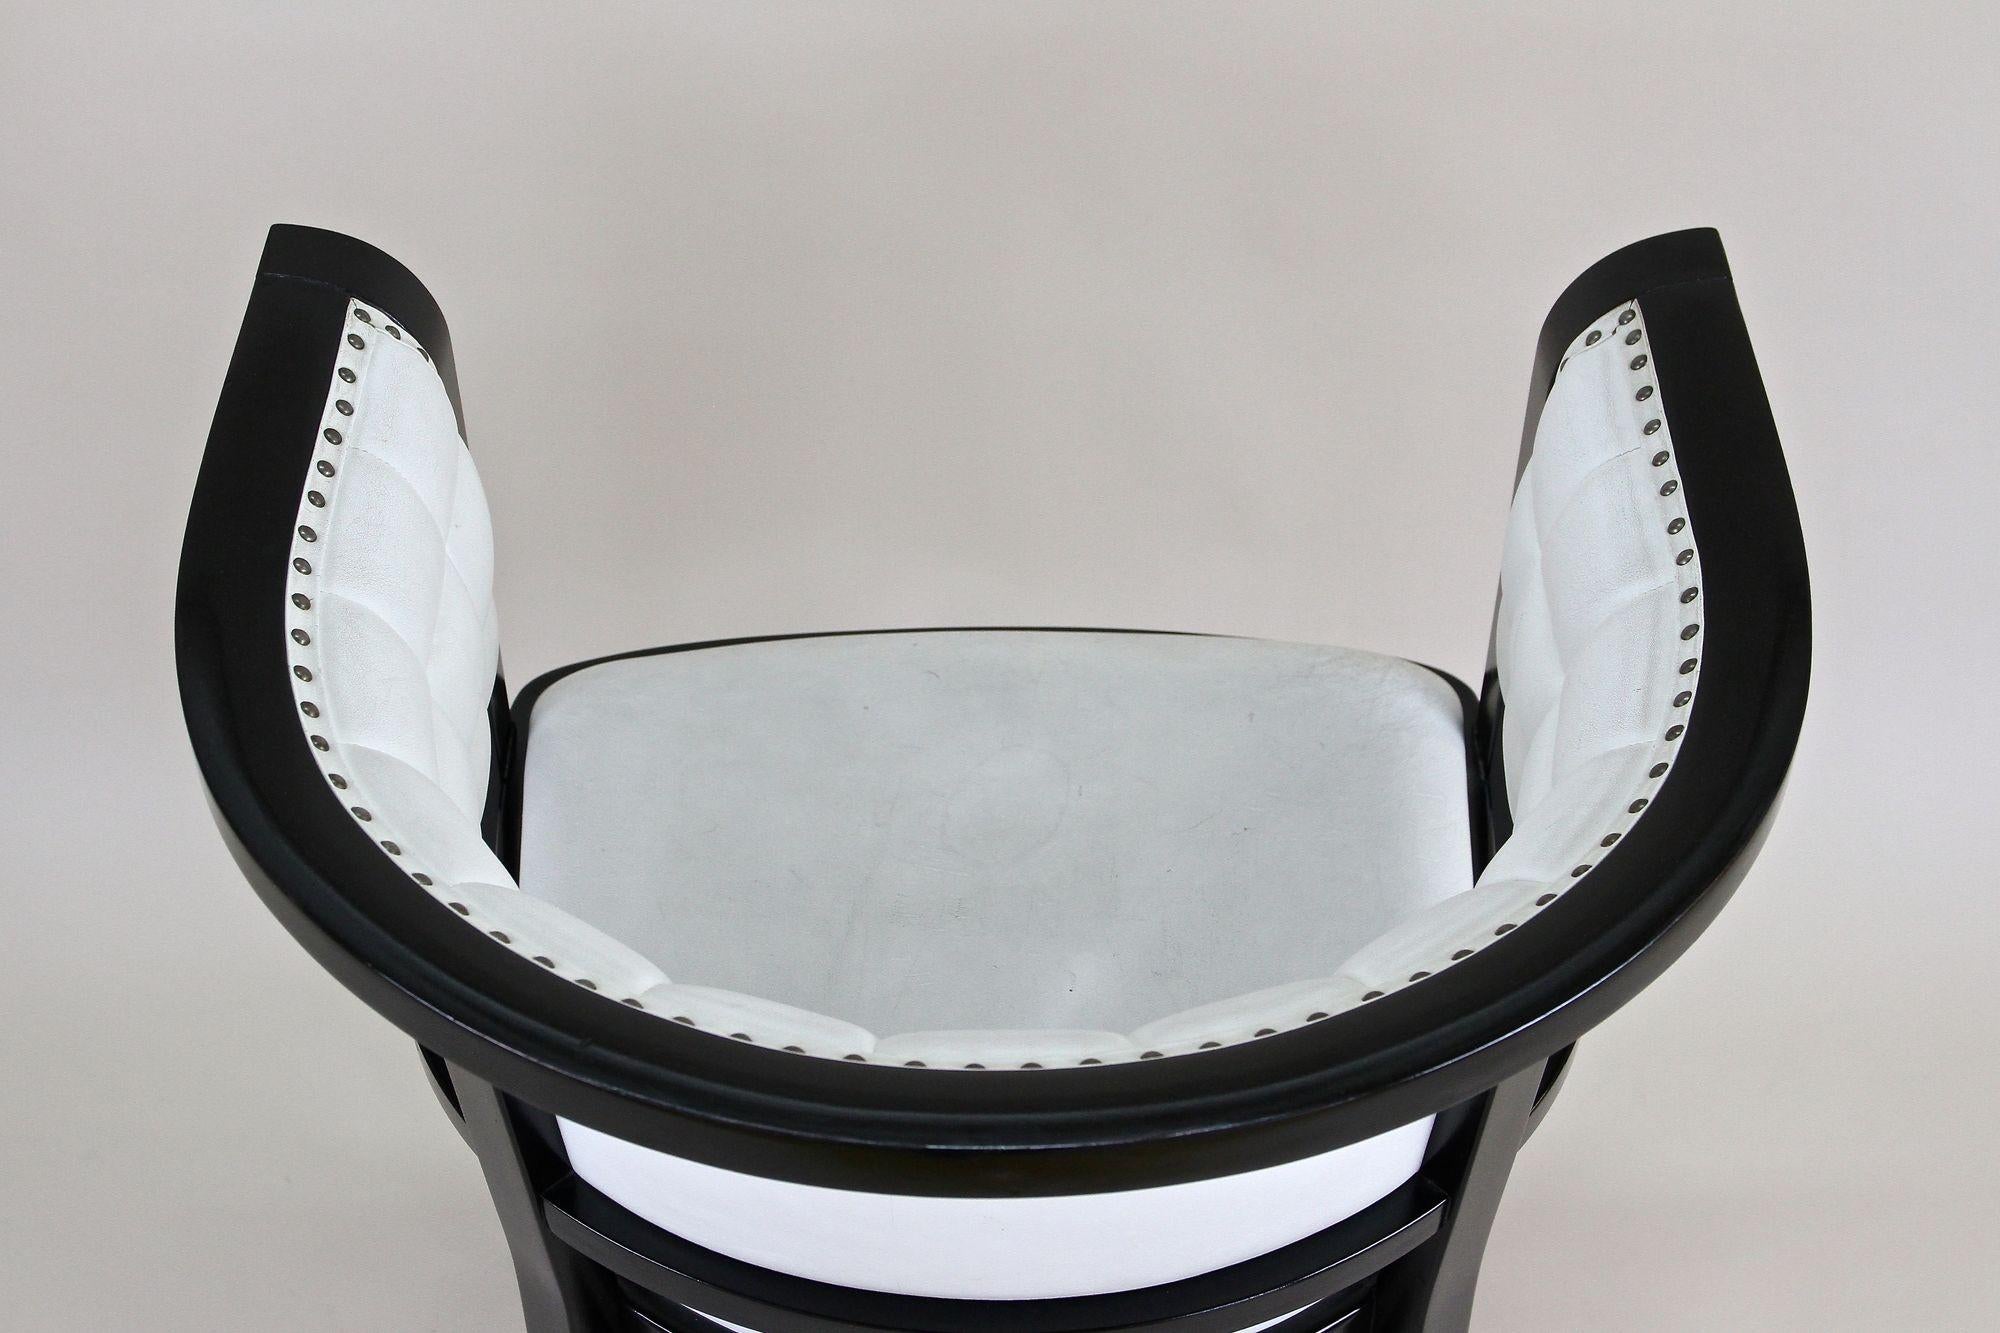 Black Thonet Armchair with White Leather, Design Marcel Kammerer, at circa 1980 For Sale 4